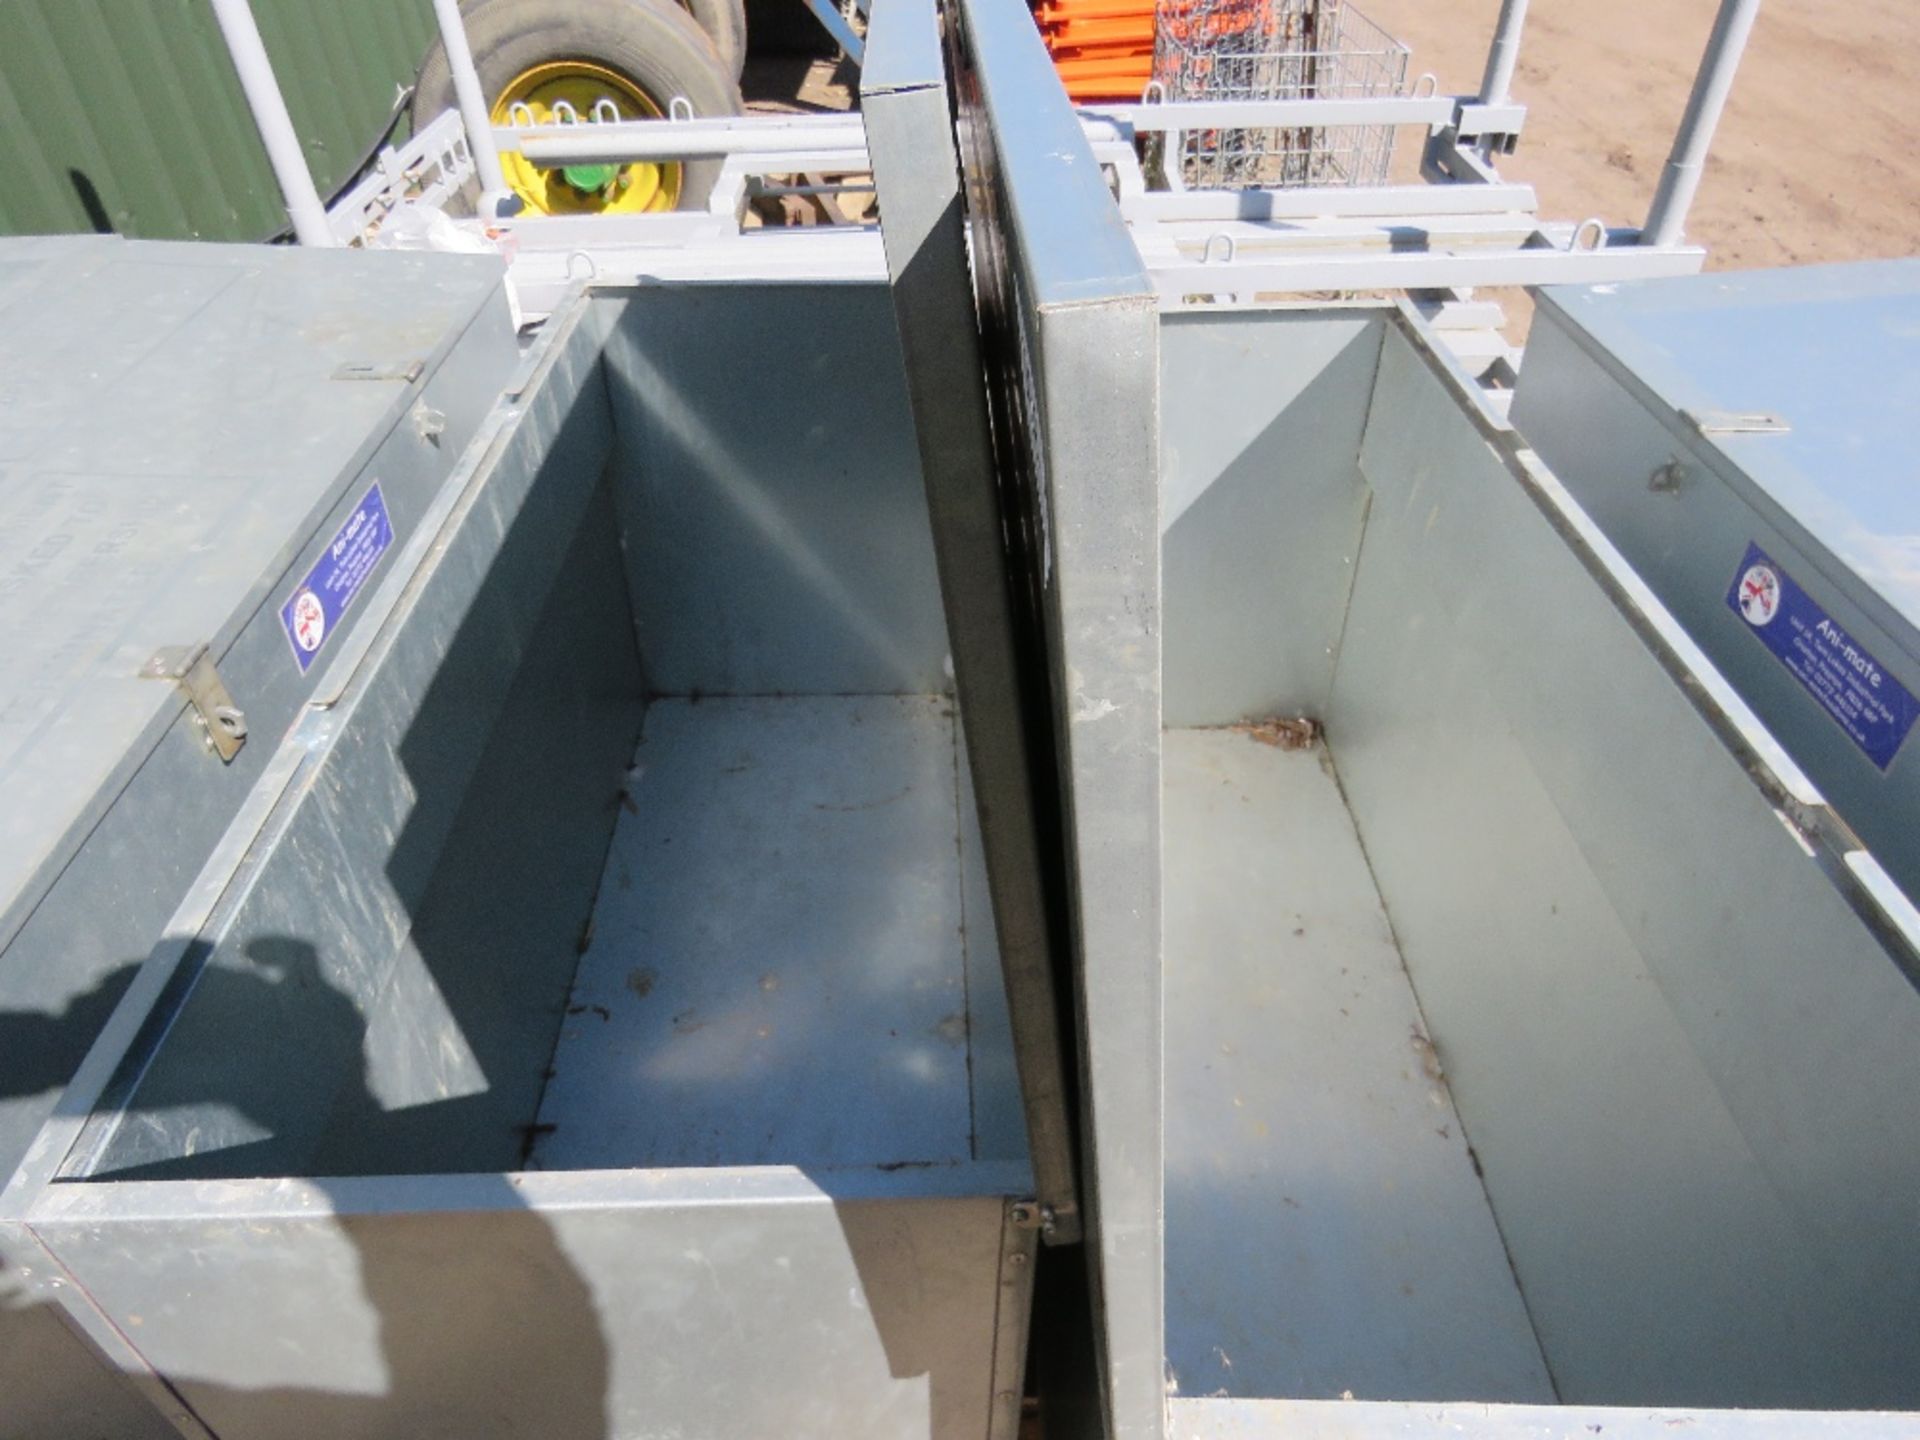 2 X ANIMATE MAKE LOCKABLE FEED STORAGE BINS: 130CM WIDE X 70CM HEIGHT X 52CM DEPTH APPROX. PREVIOUS - Image 5 of 5